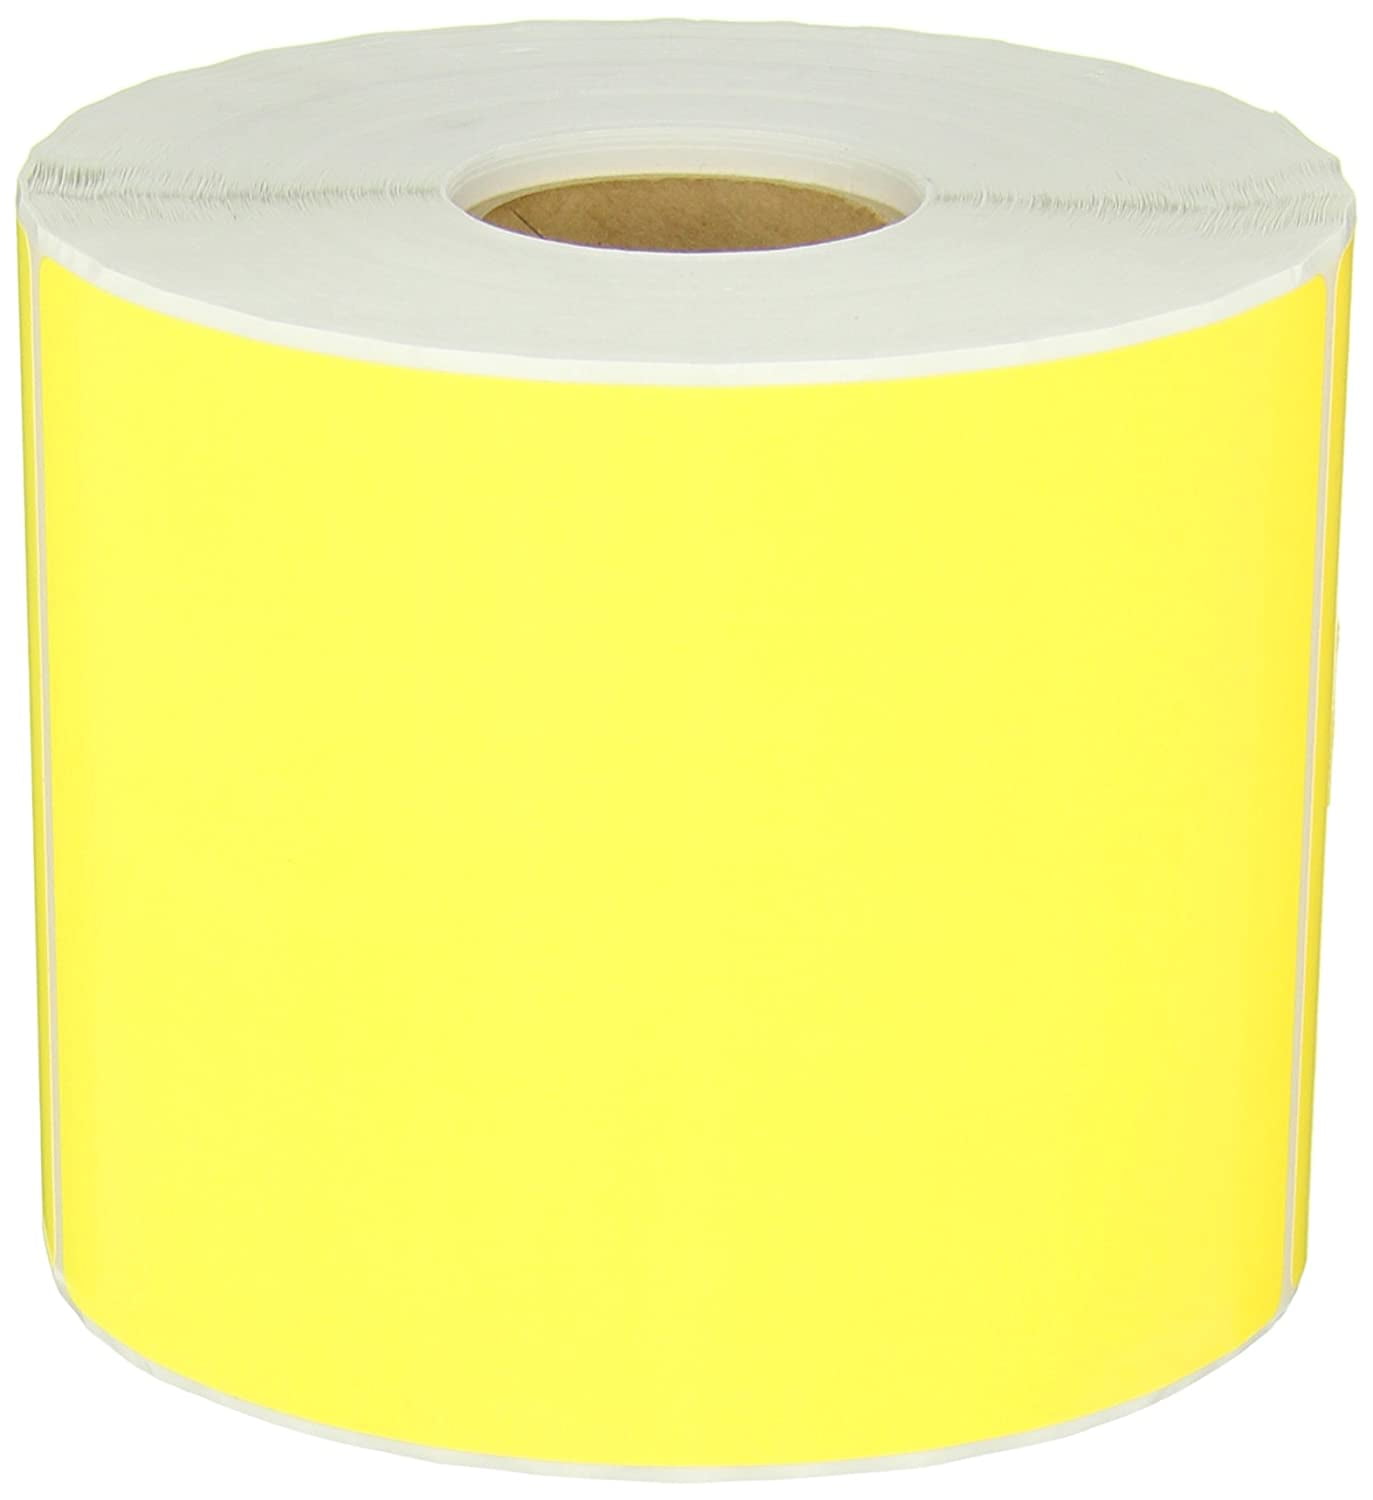 DL635L Fluorescent Yellow 6 L x 4 W Roll of 500 Aviditi Rectangle Inventory Color Coded Label 